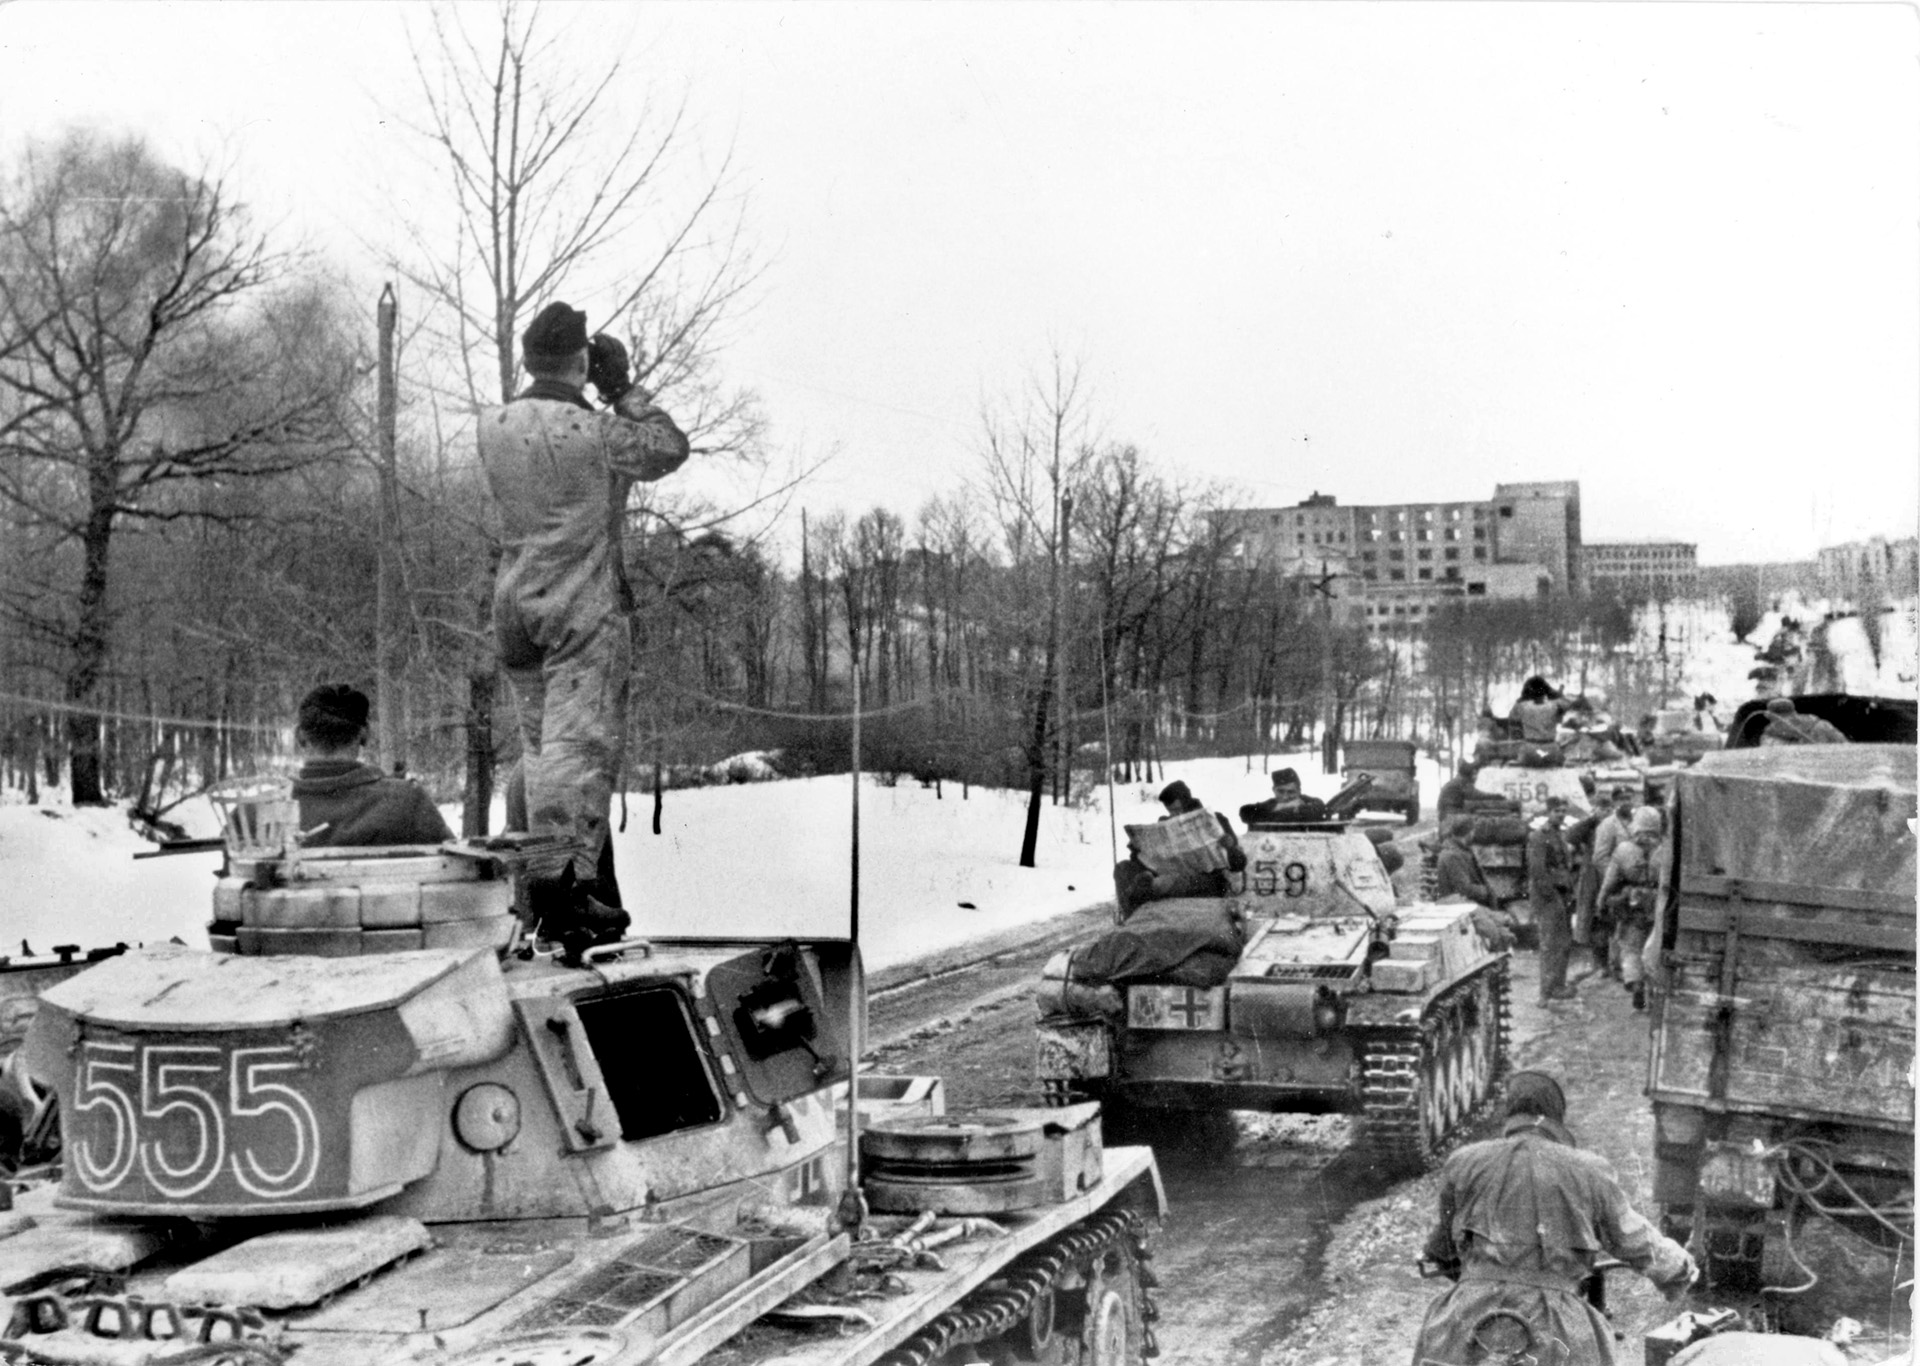 A battle group from Lt. Gen. Josef “Sepp” Dietrich’s  1st SS Panzer Division Leibstandarte Adolf Hitler fights its way into northern Kharkov. When the Soviet forces inside the city shifted north to block Dietrich’s advance, they unwittingly allowed the 2nd SS Panzer Division Das Reich to enter unopposed from the west. The Soviets withdrew on March 13.